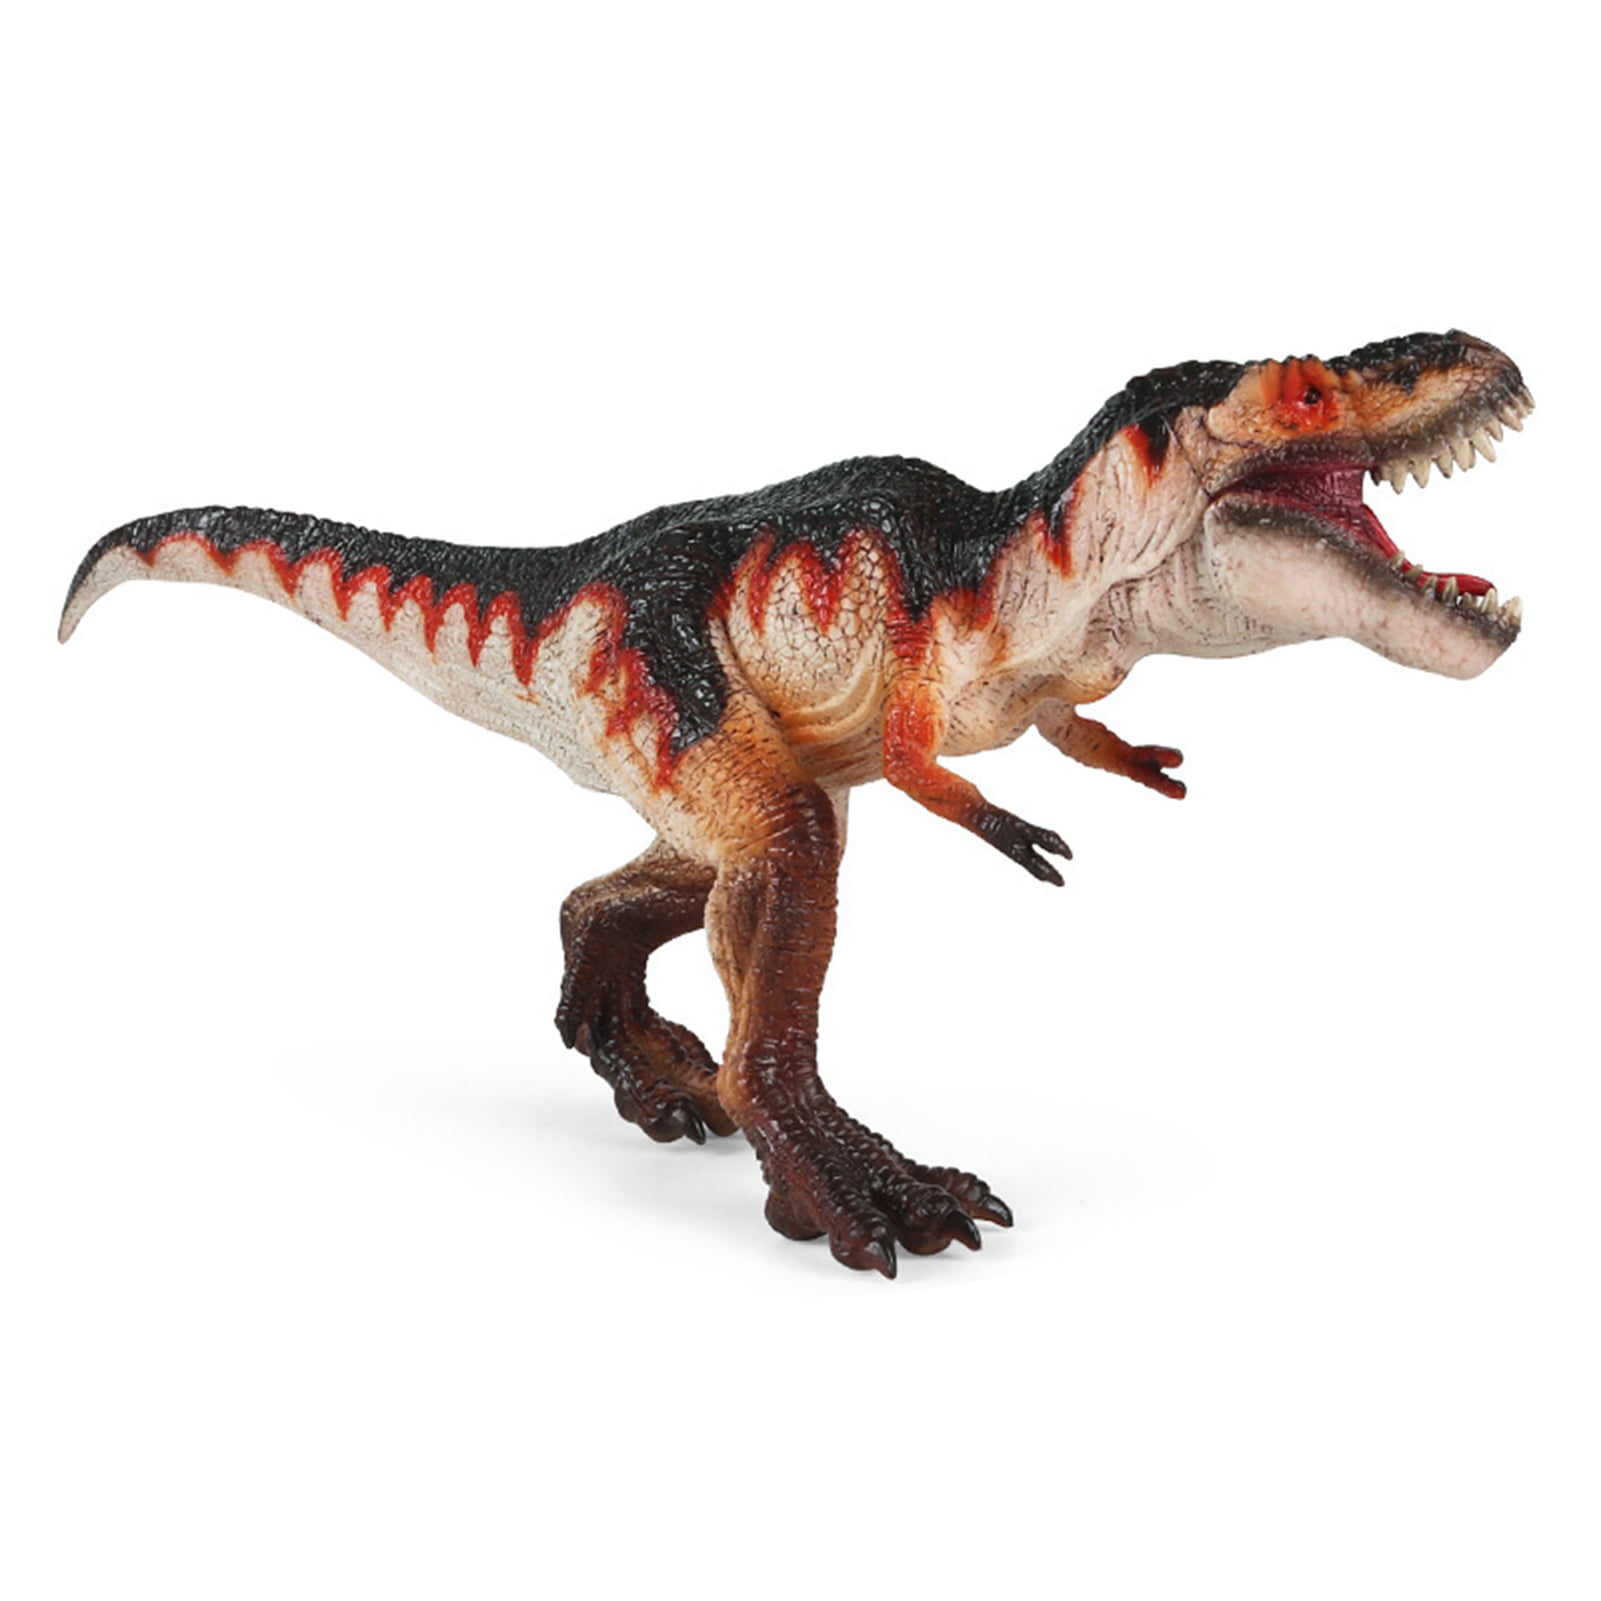 Scotty Tyrannosaurus Dinosaur Model - Enhance Cognitive Ability and Early  Education, Smell-less Dinosaur Action Figure for Children 